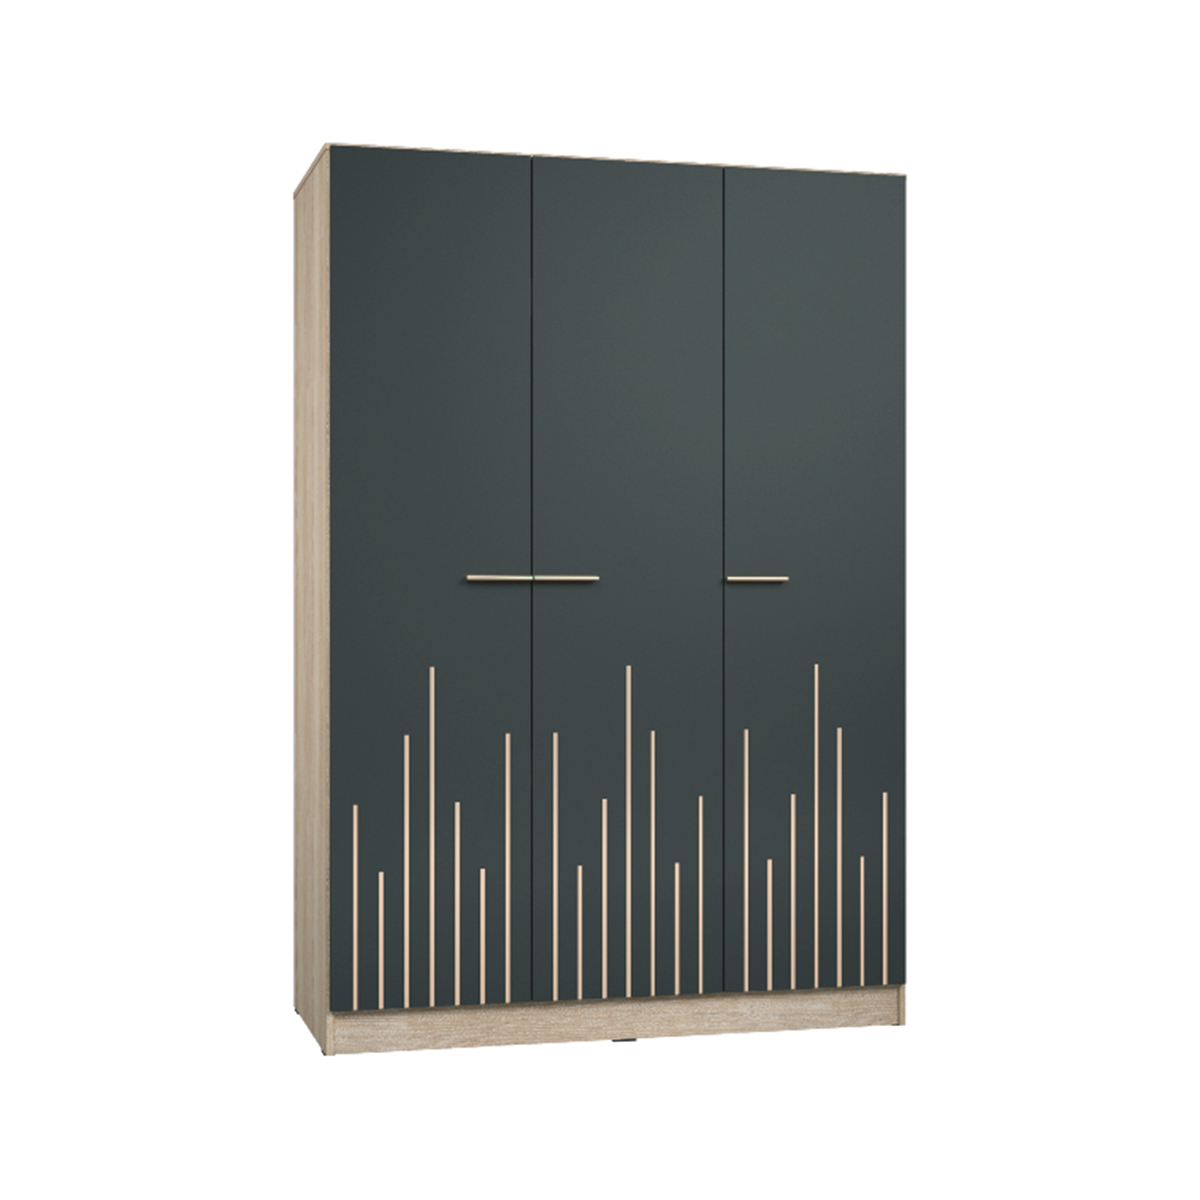 97098::XHB-745::A Sure wardrobe with 4 swing glass doors and 2 drawers. Dimension (WxDxH) cm : 163.8x62x220. Available in Oak SURE Wardrobes SURE Wardrobes SURE Wardrobes